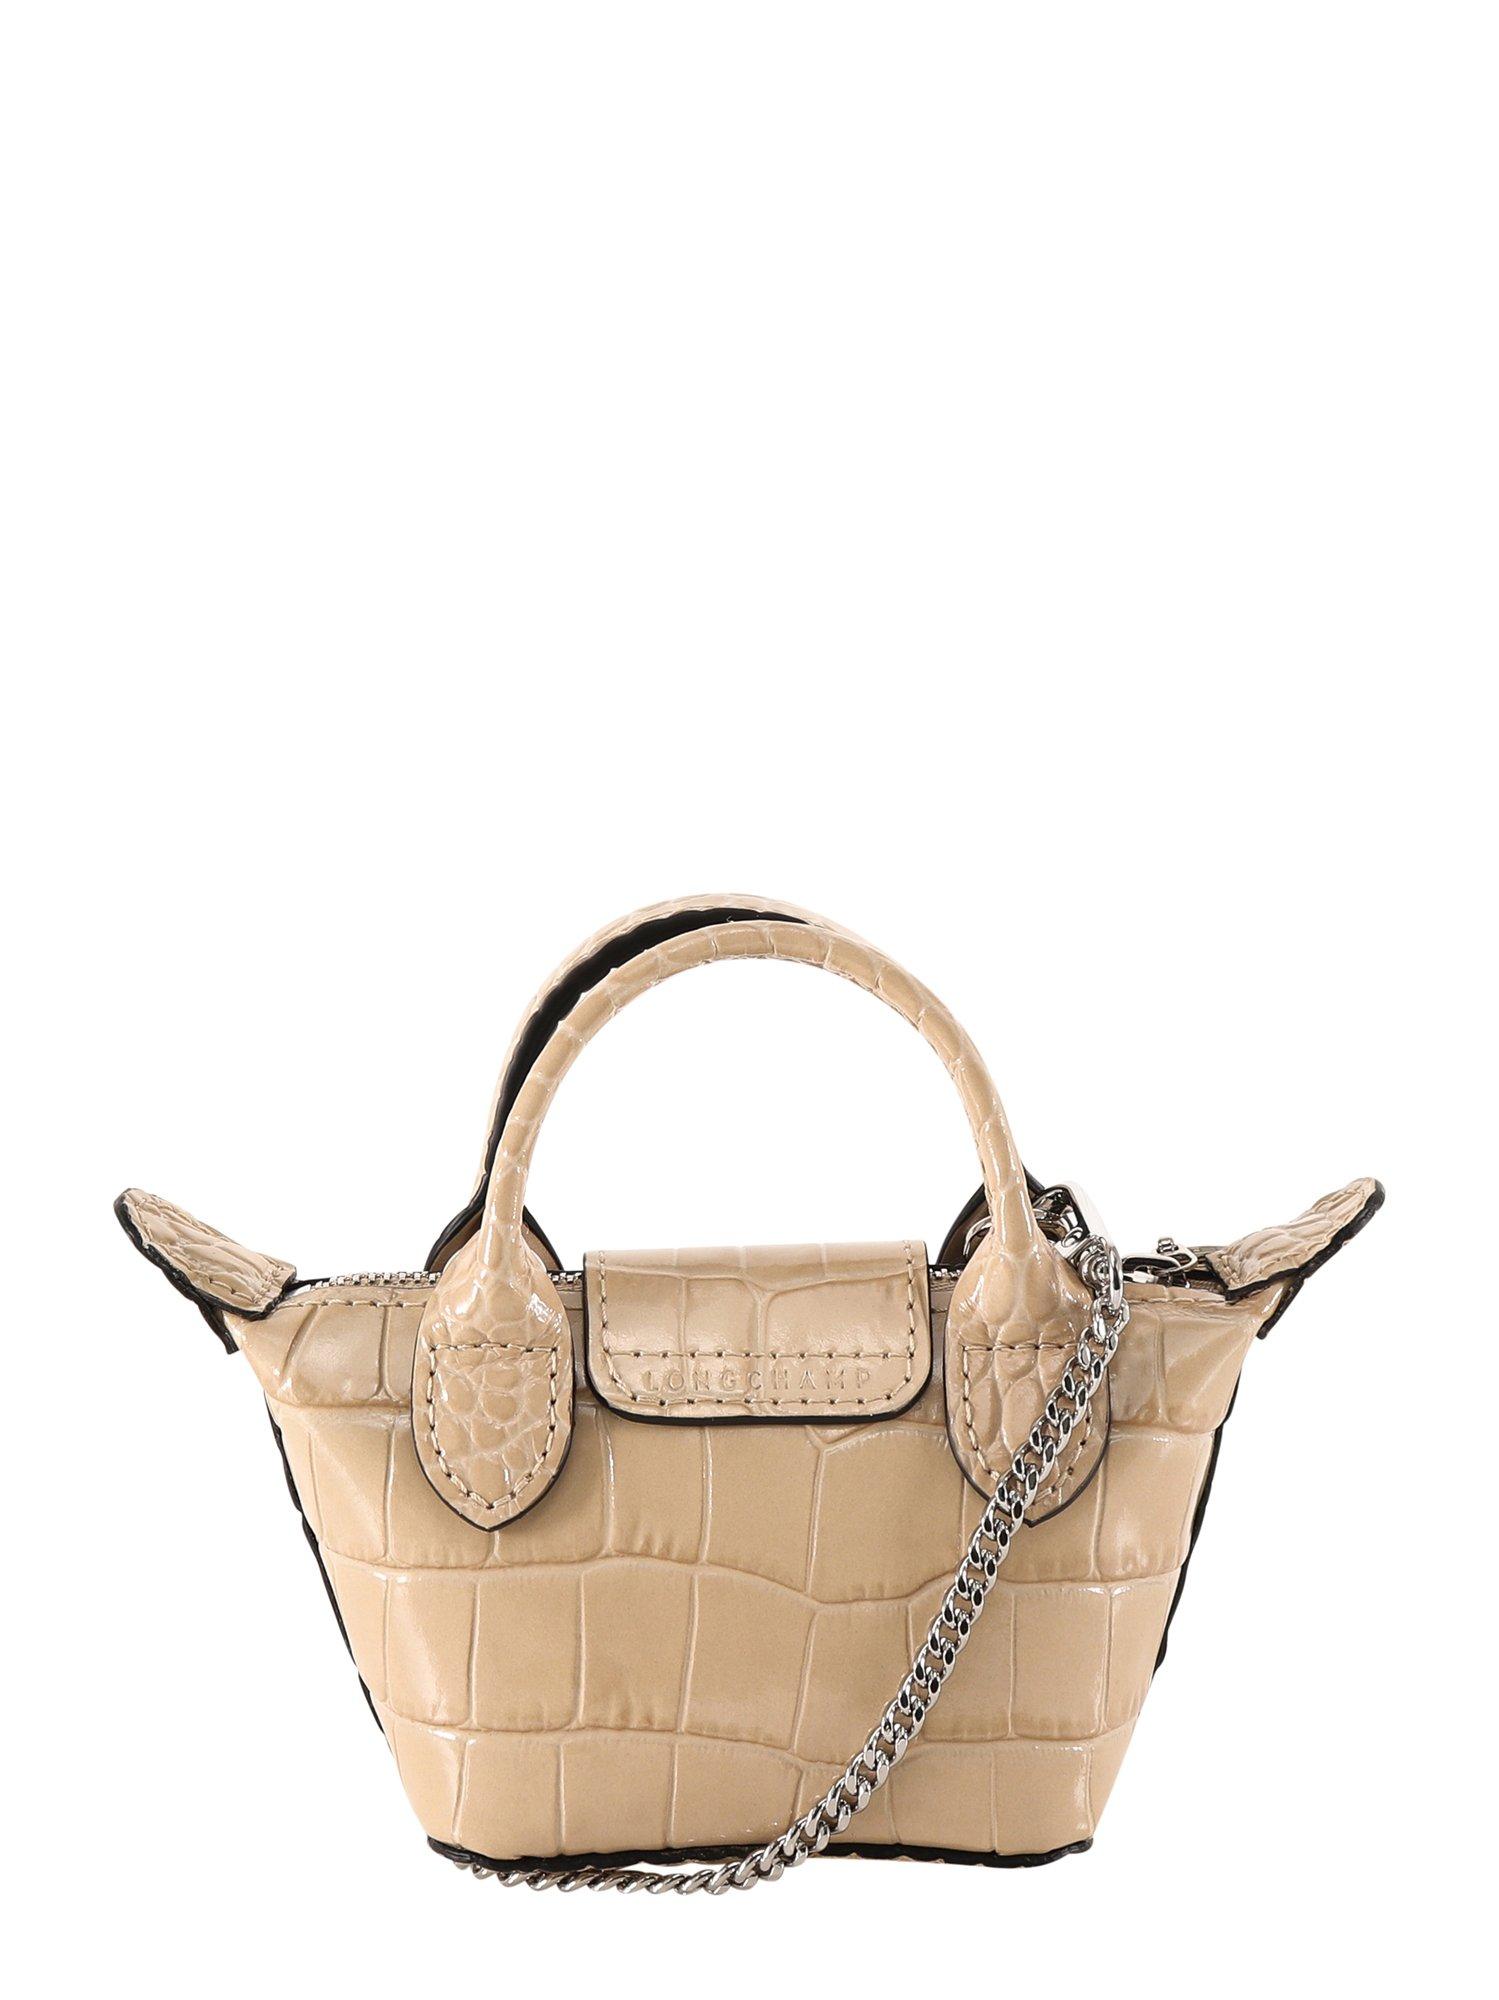 Longchamp Le Pliage Extra Small Crossbody Bag in Natural | Lyst